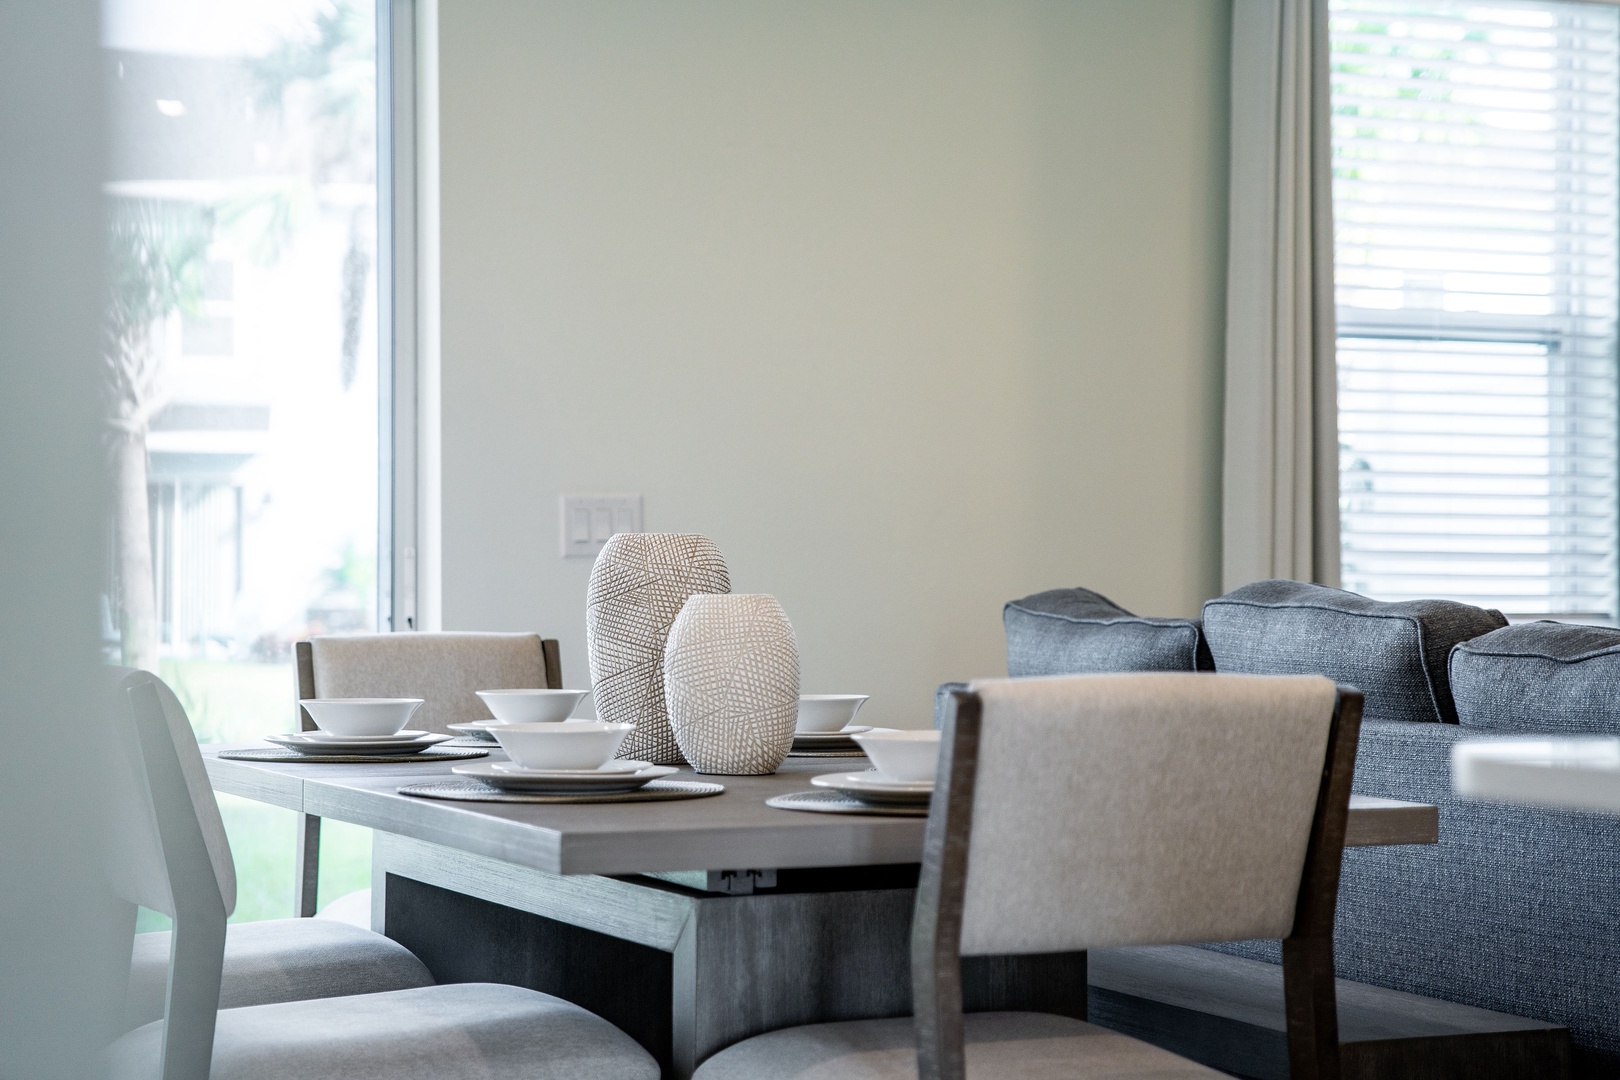 Gather family around the dining table, with seating for 7